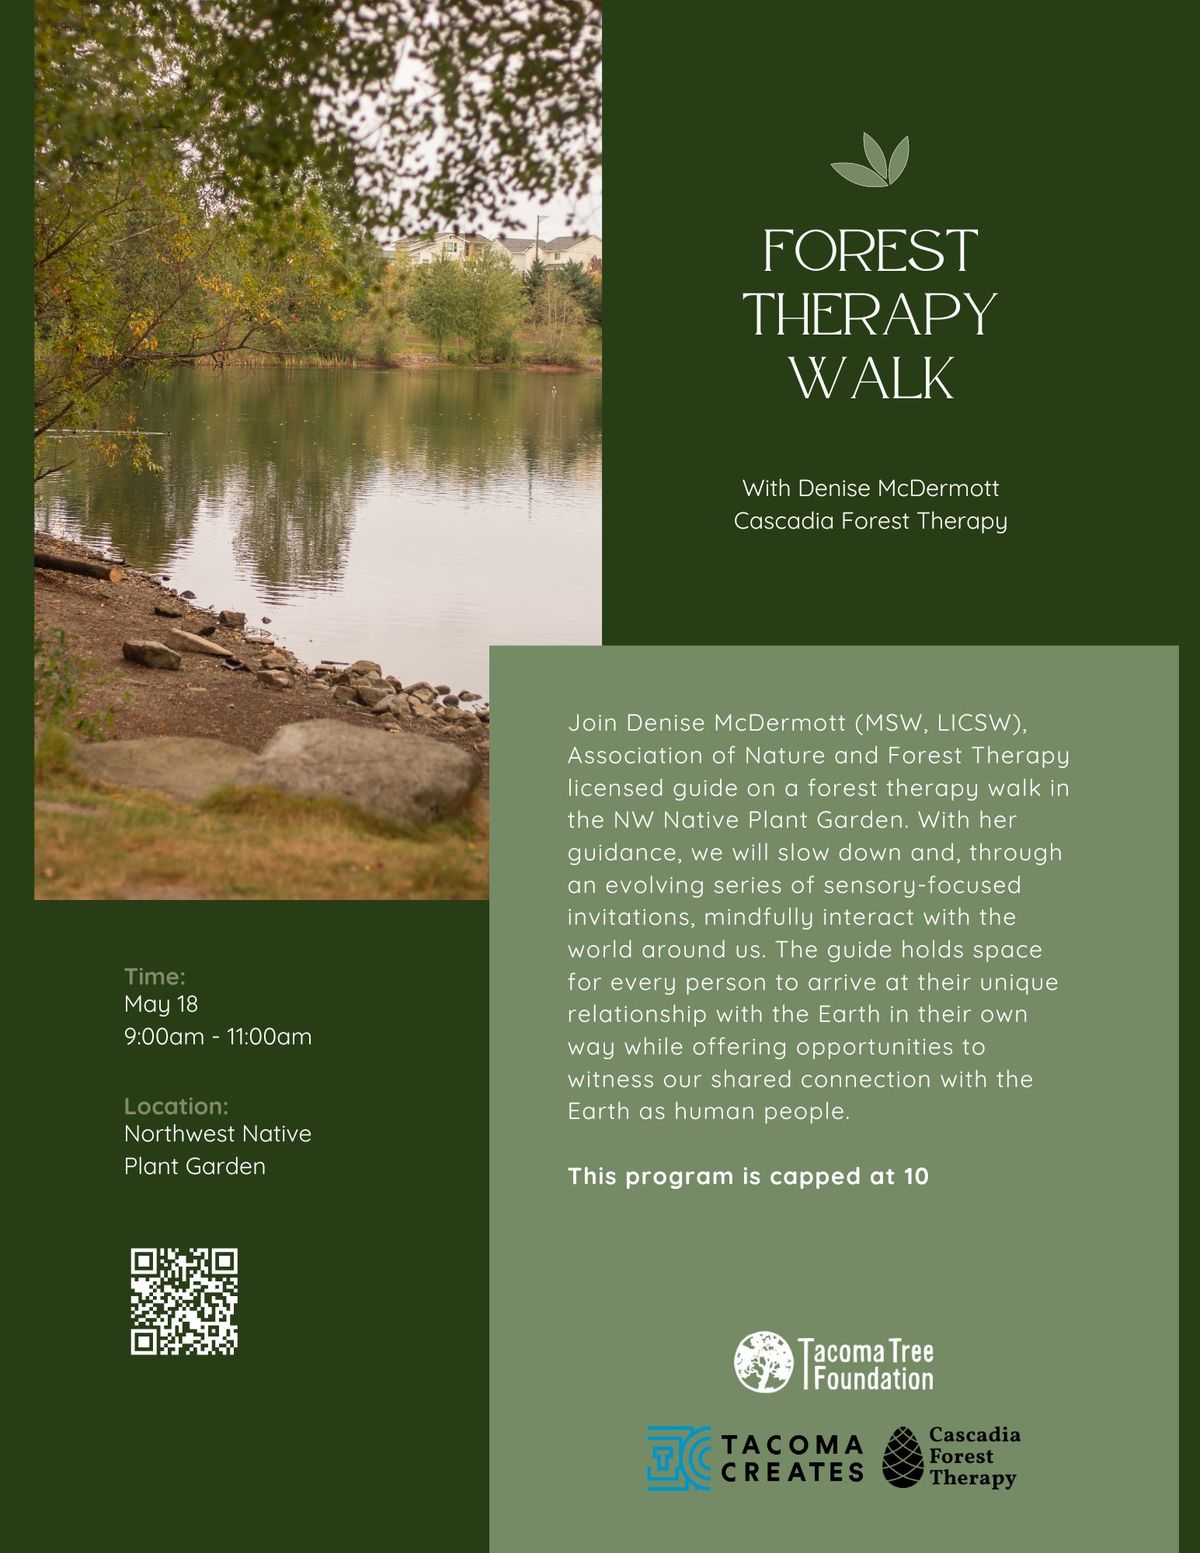 Forest Therapy Walk with Denise McDermott